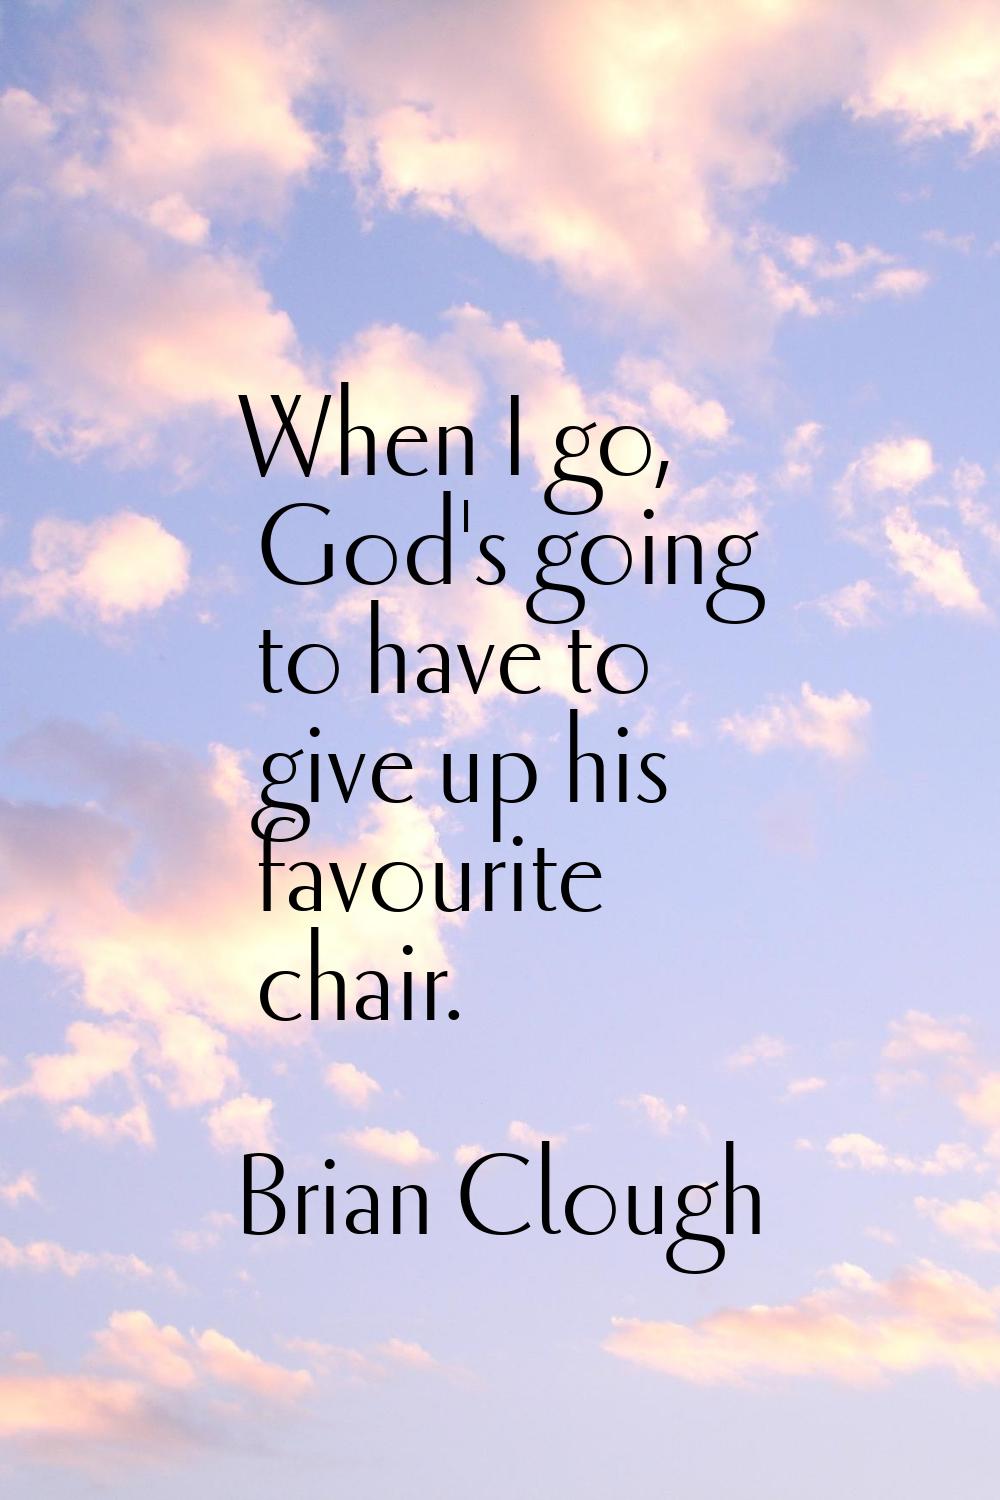 When I go, God's going to have to give up his favourite chair.